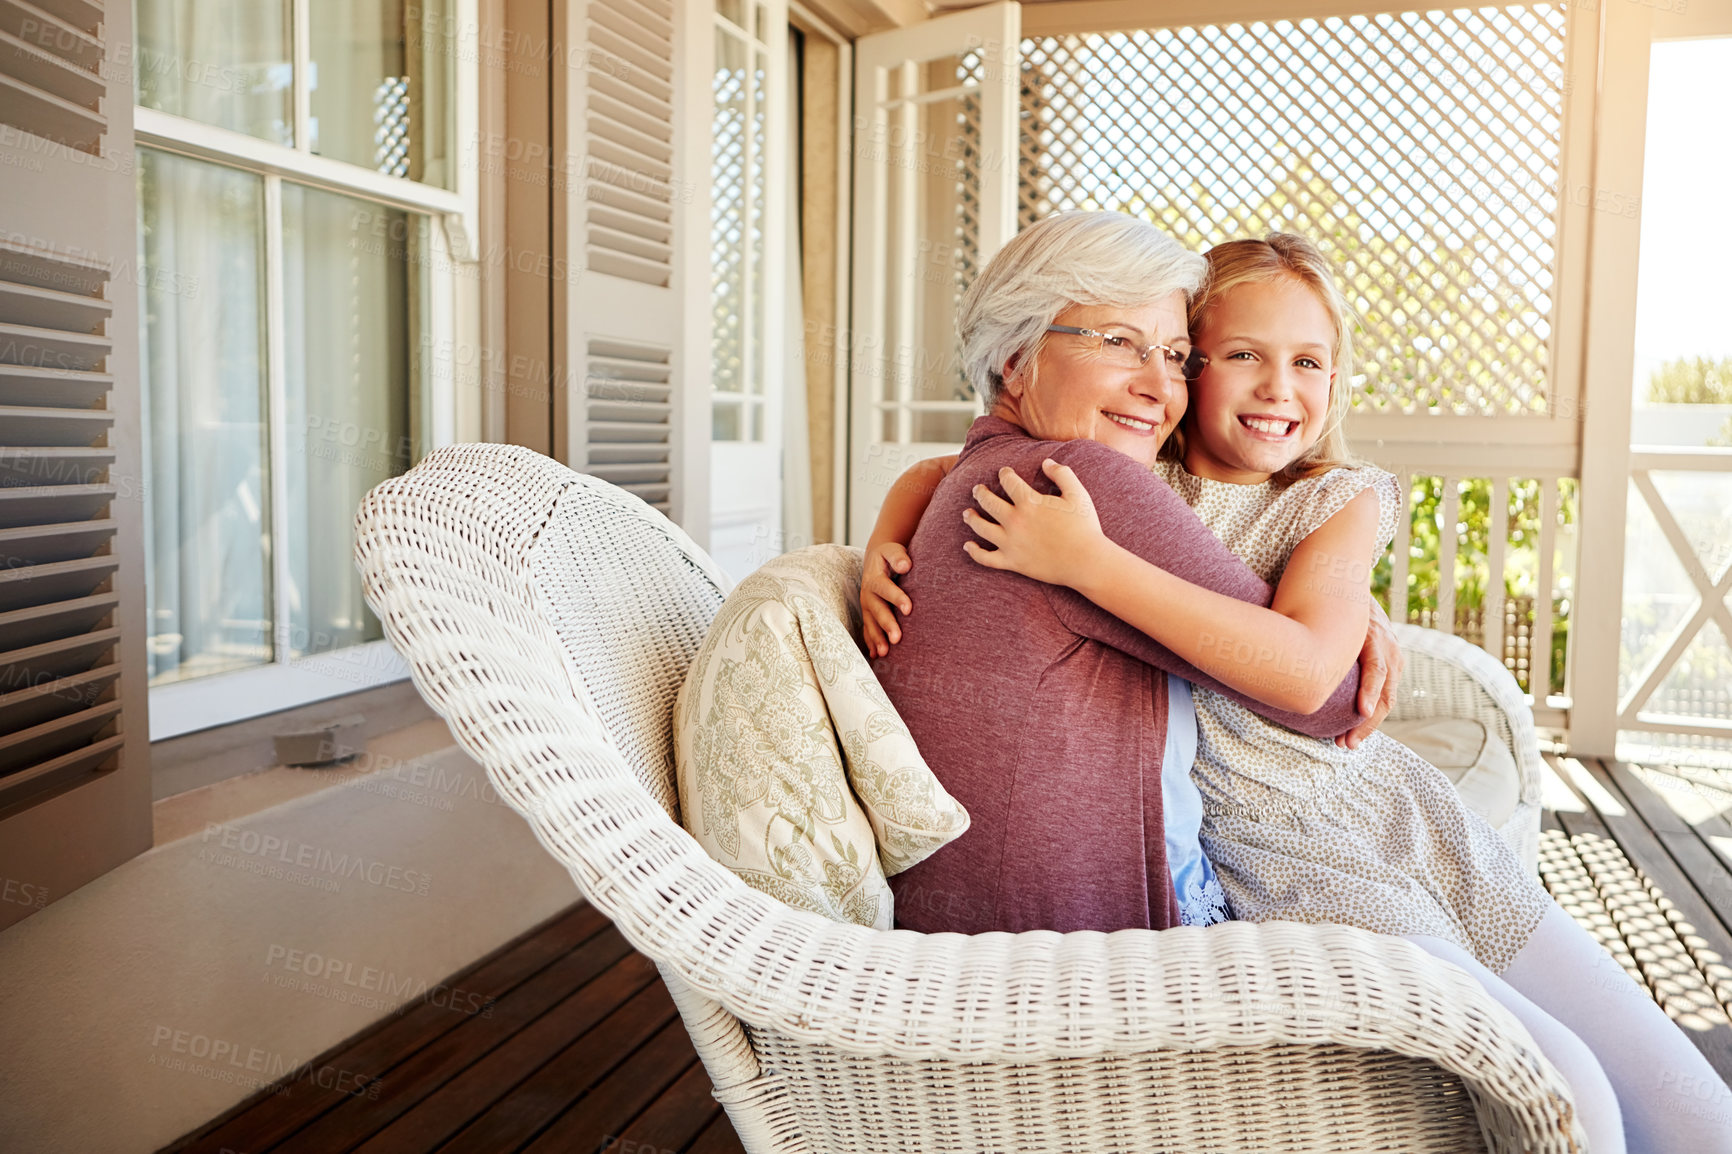 Buy stock photo Cropped portrait of a young girl sitting outside with her grandmother